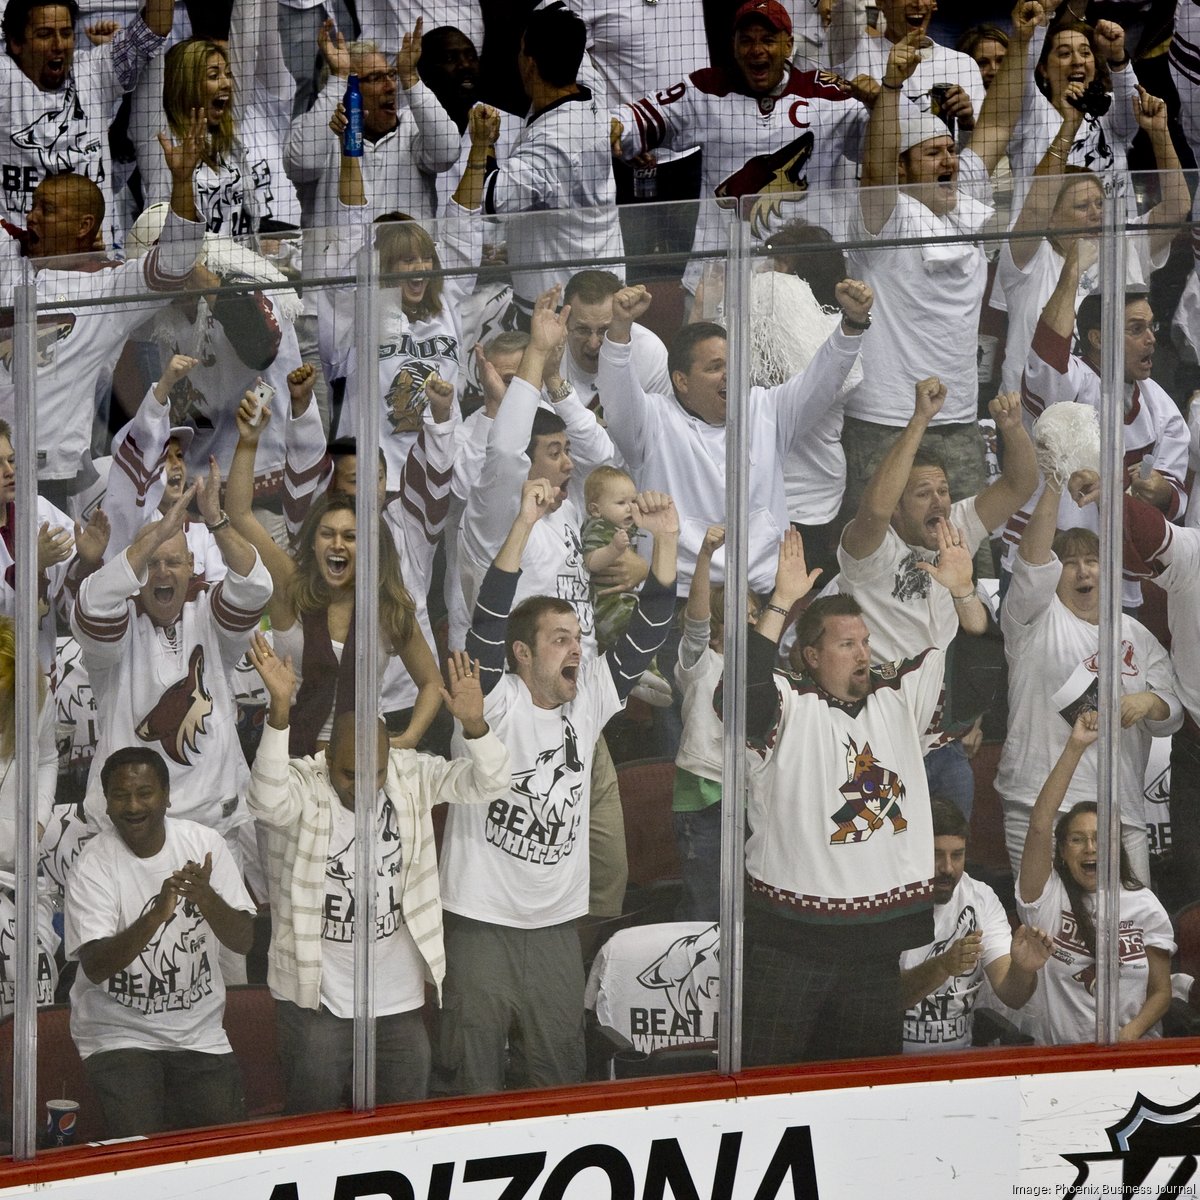 NHL To Houston - IF the Arizona Coyotes end up in Houston